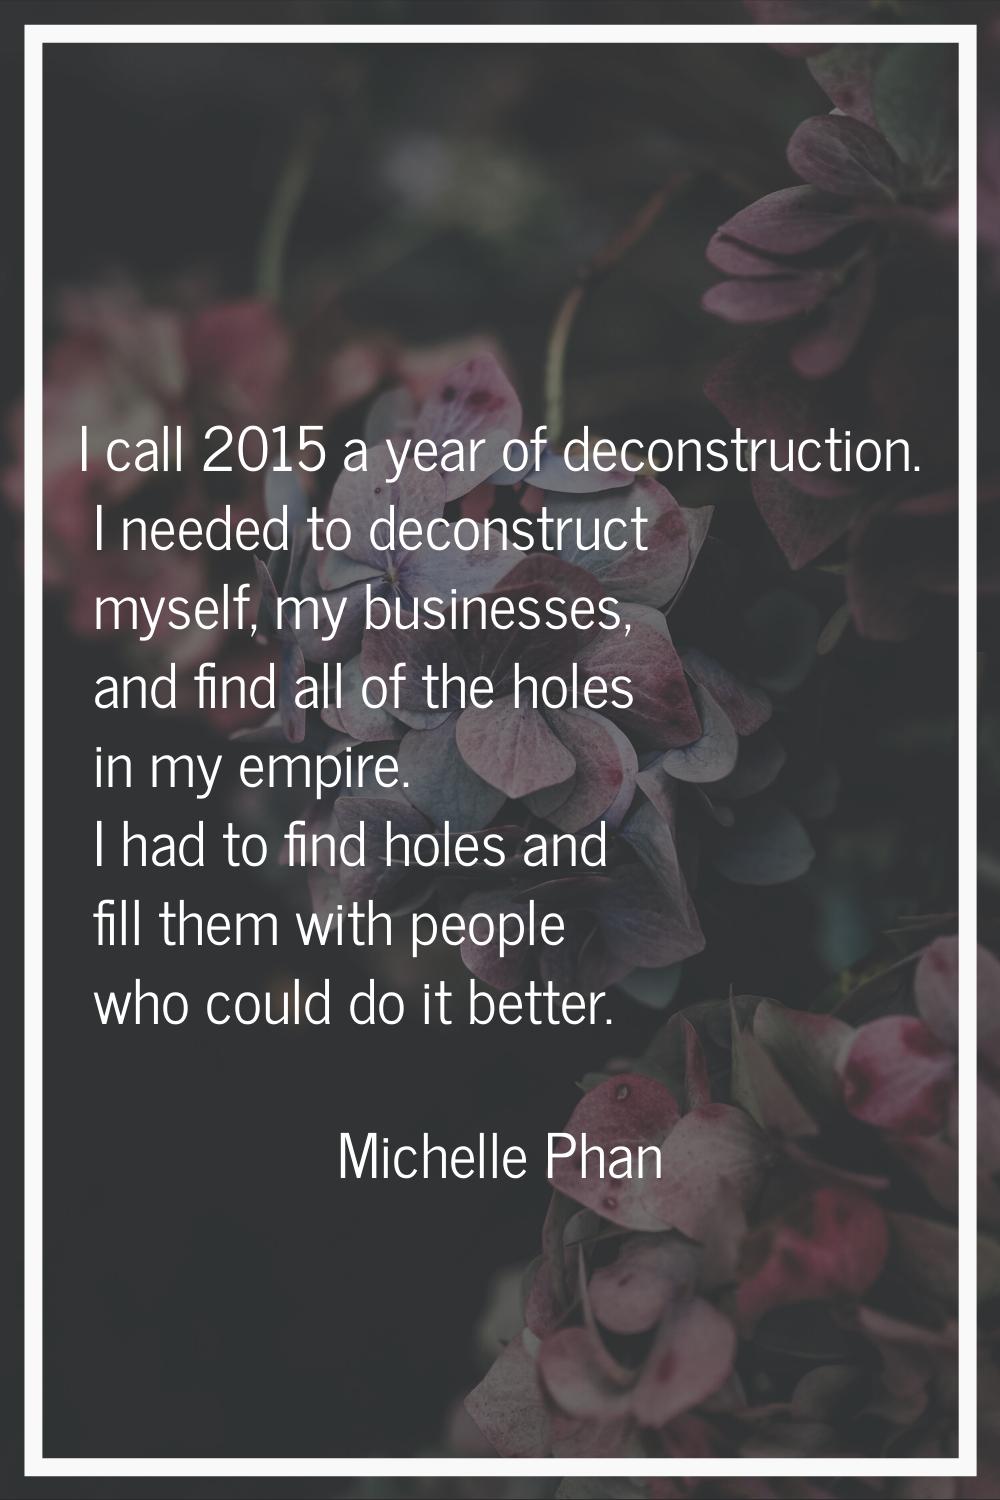 I call 2015 a year of deconstruction. I needed to deconstruct myself, my businesses, and find all o